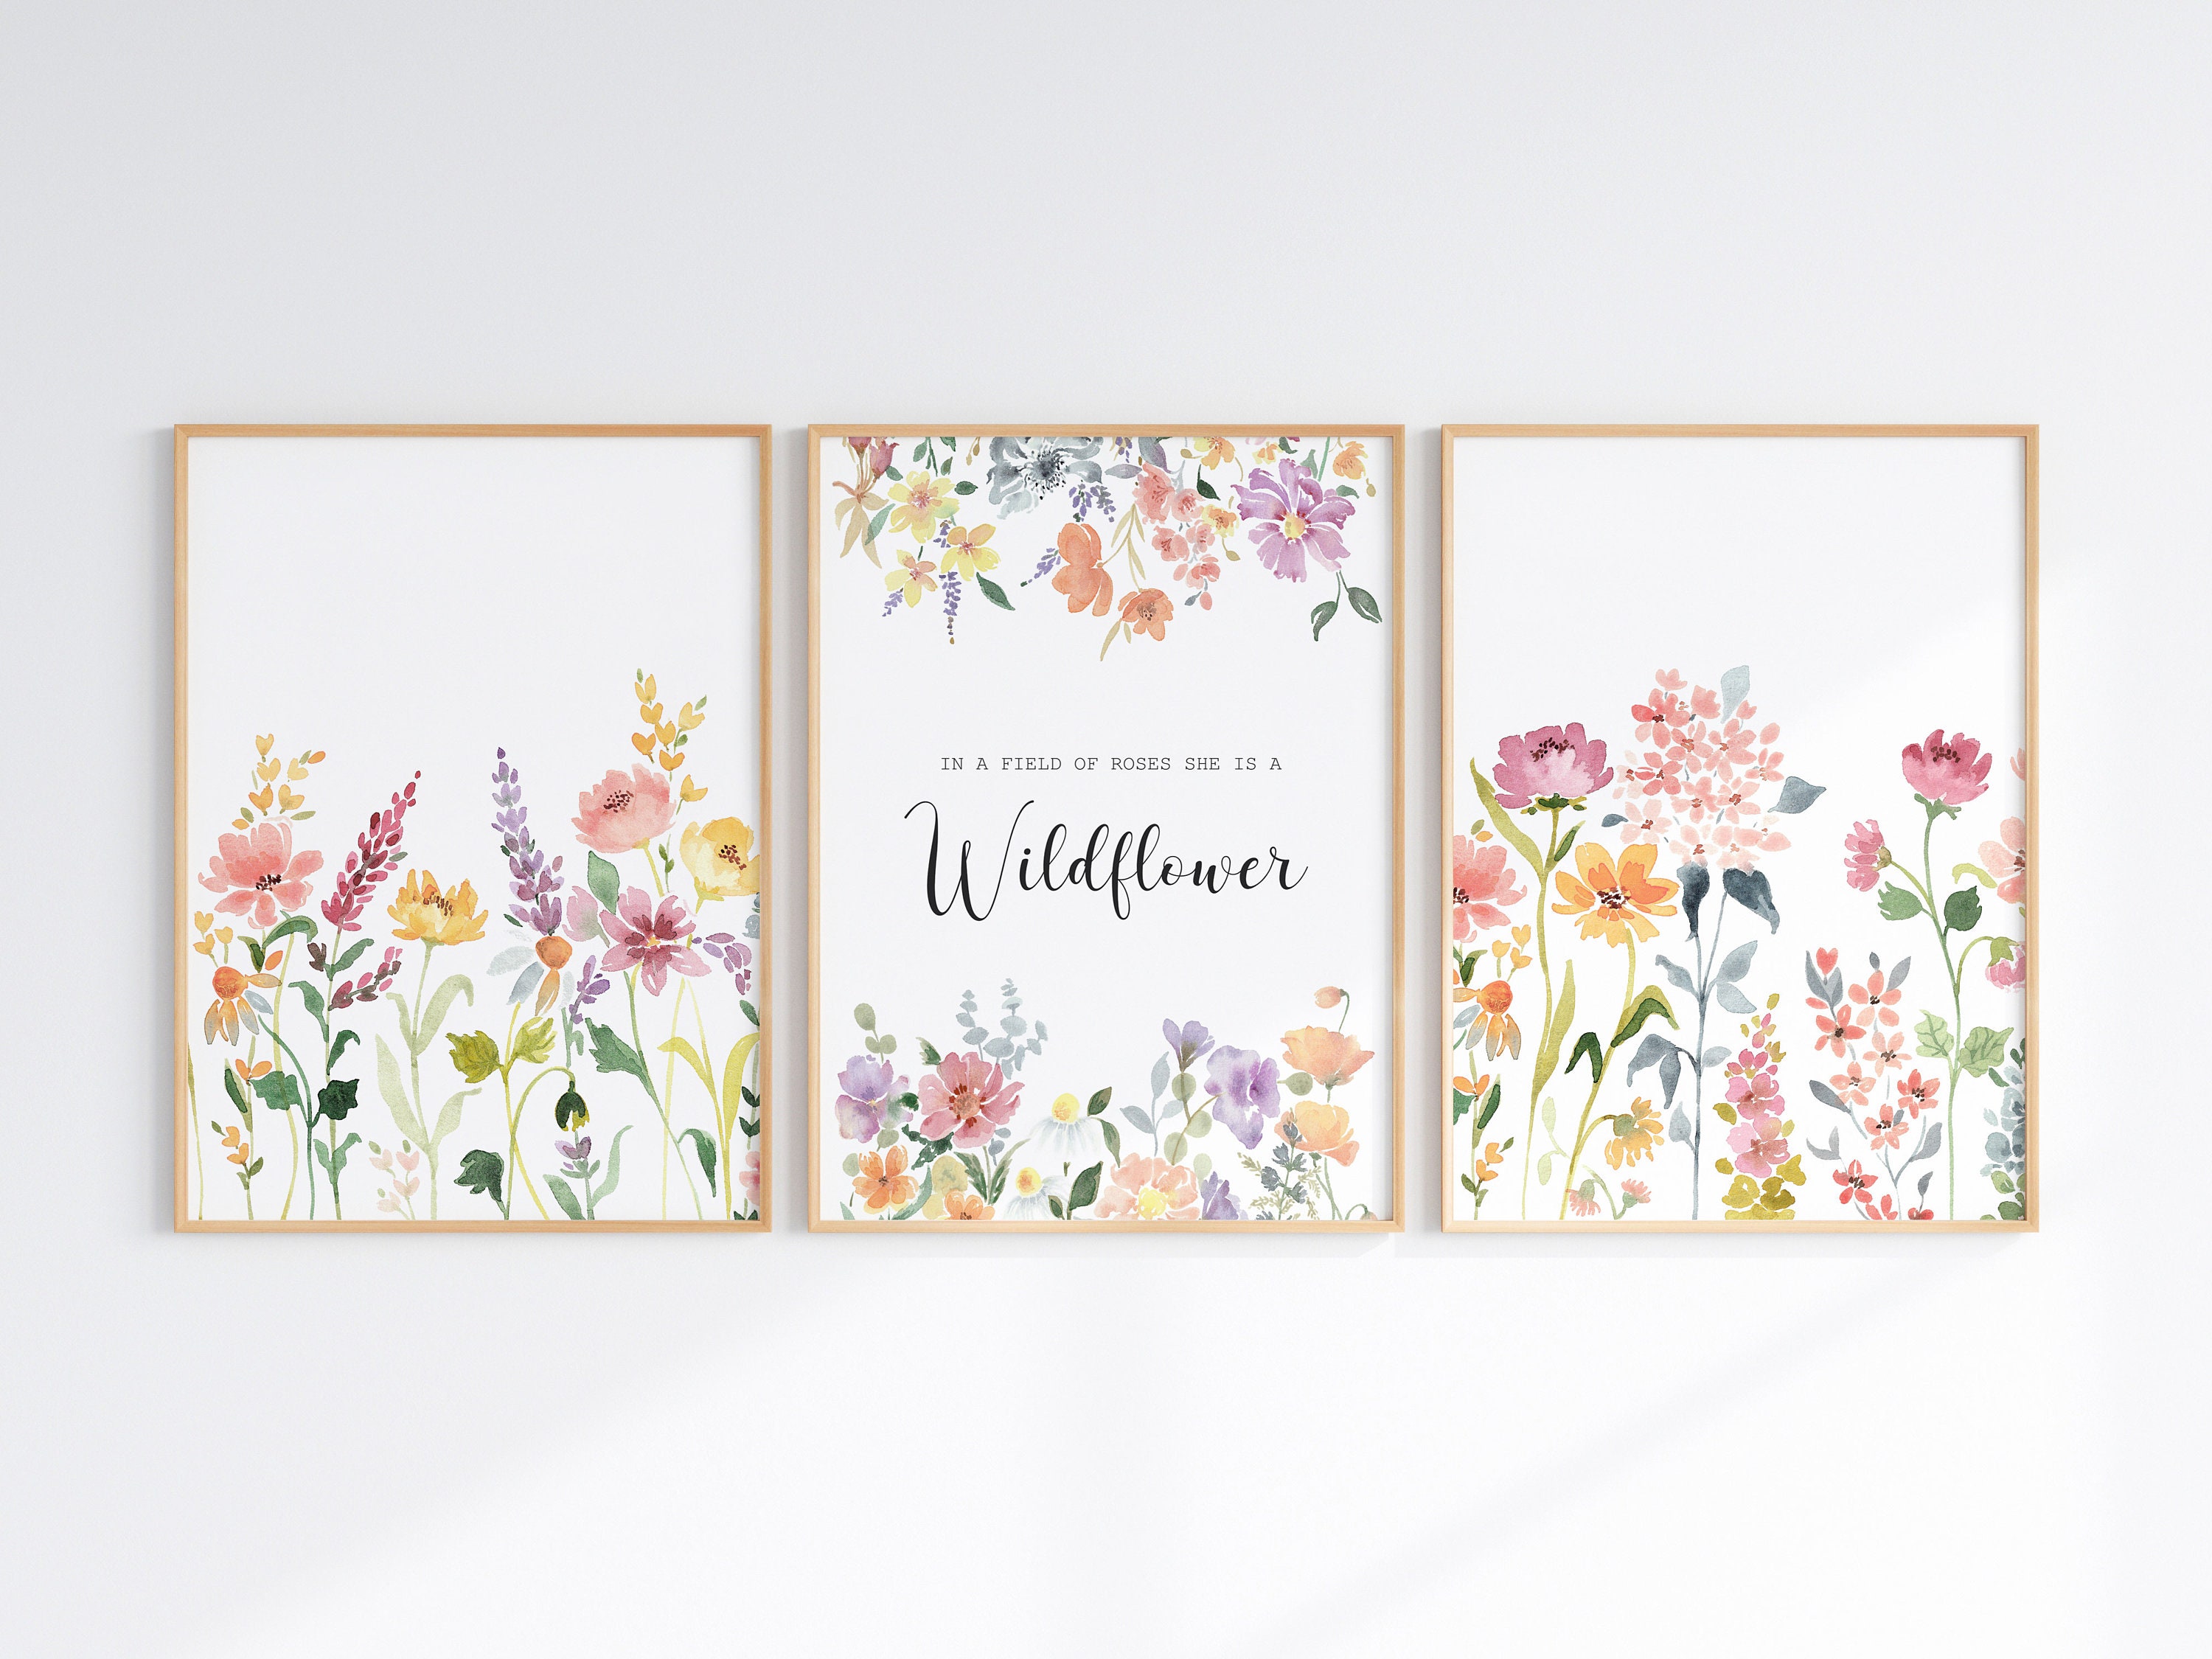 Wildflower Watercolor Prints for Girls Room, Floral Quote Wall Art Set of  3, in A Field of Roses She is A Wildflower, Digital Download - Etsy